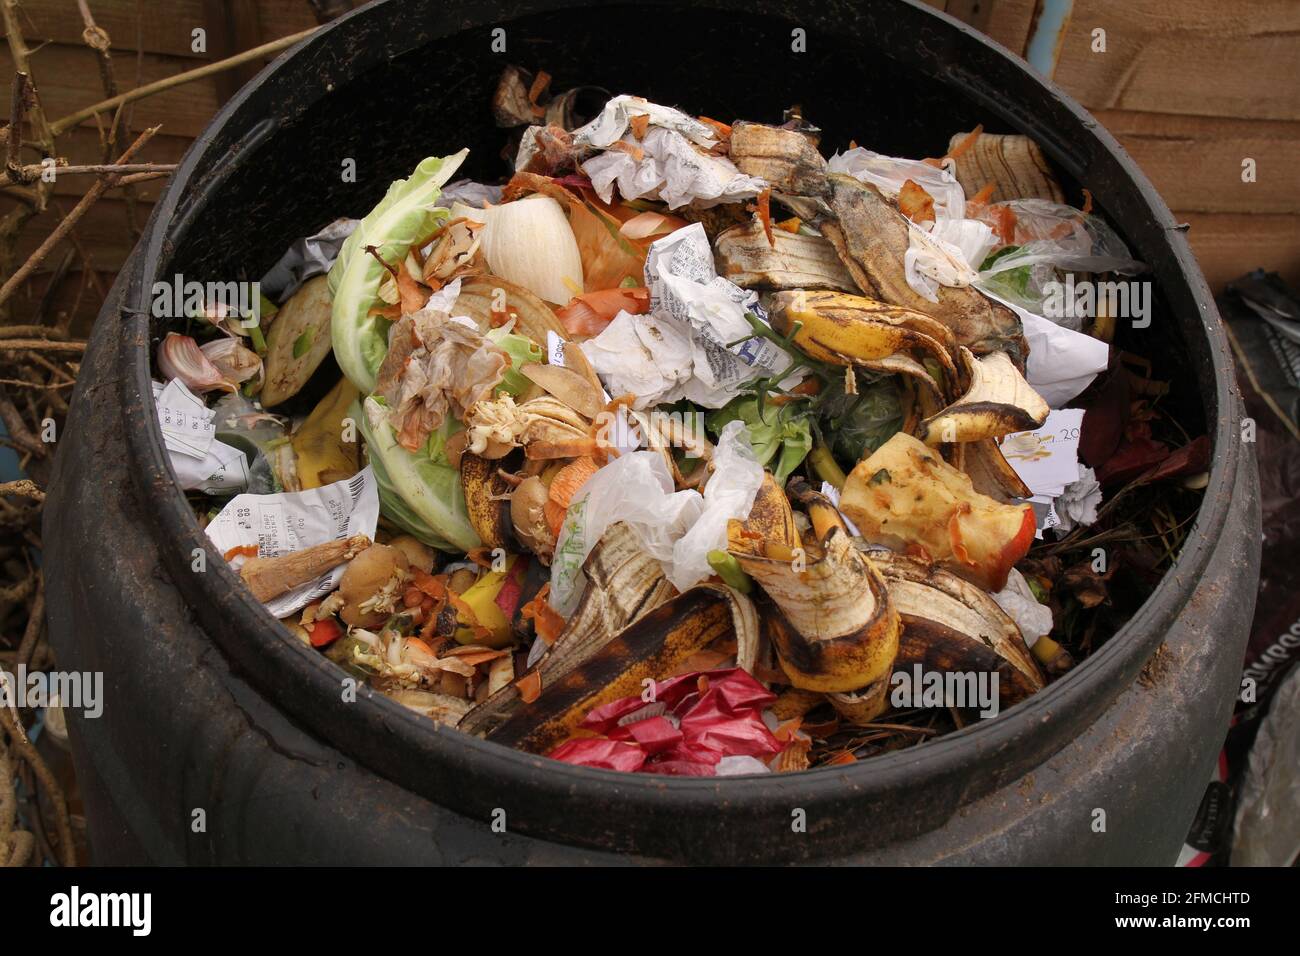 Contents of an outdoor compost bin including vegetable waste to produce environmentally friendly garden compost and reduce waste. Stock Photo